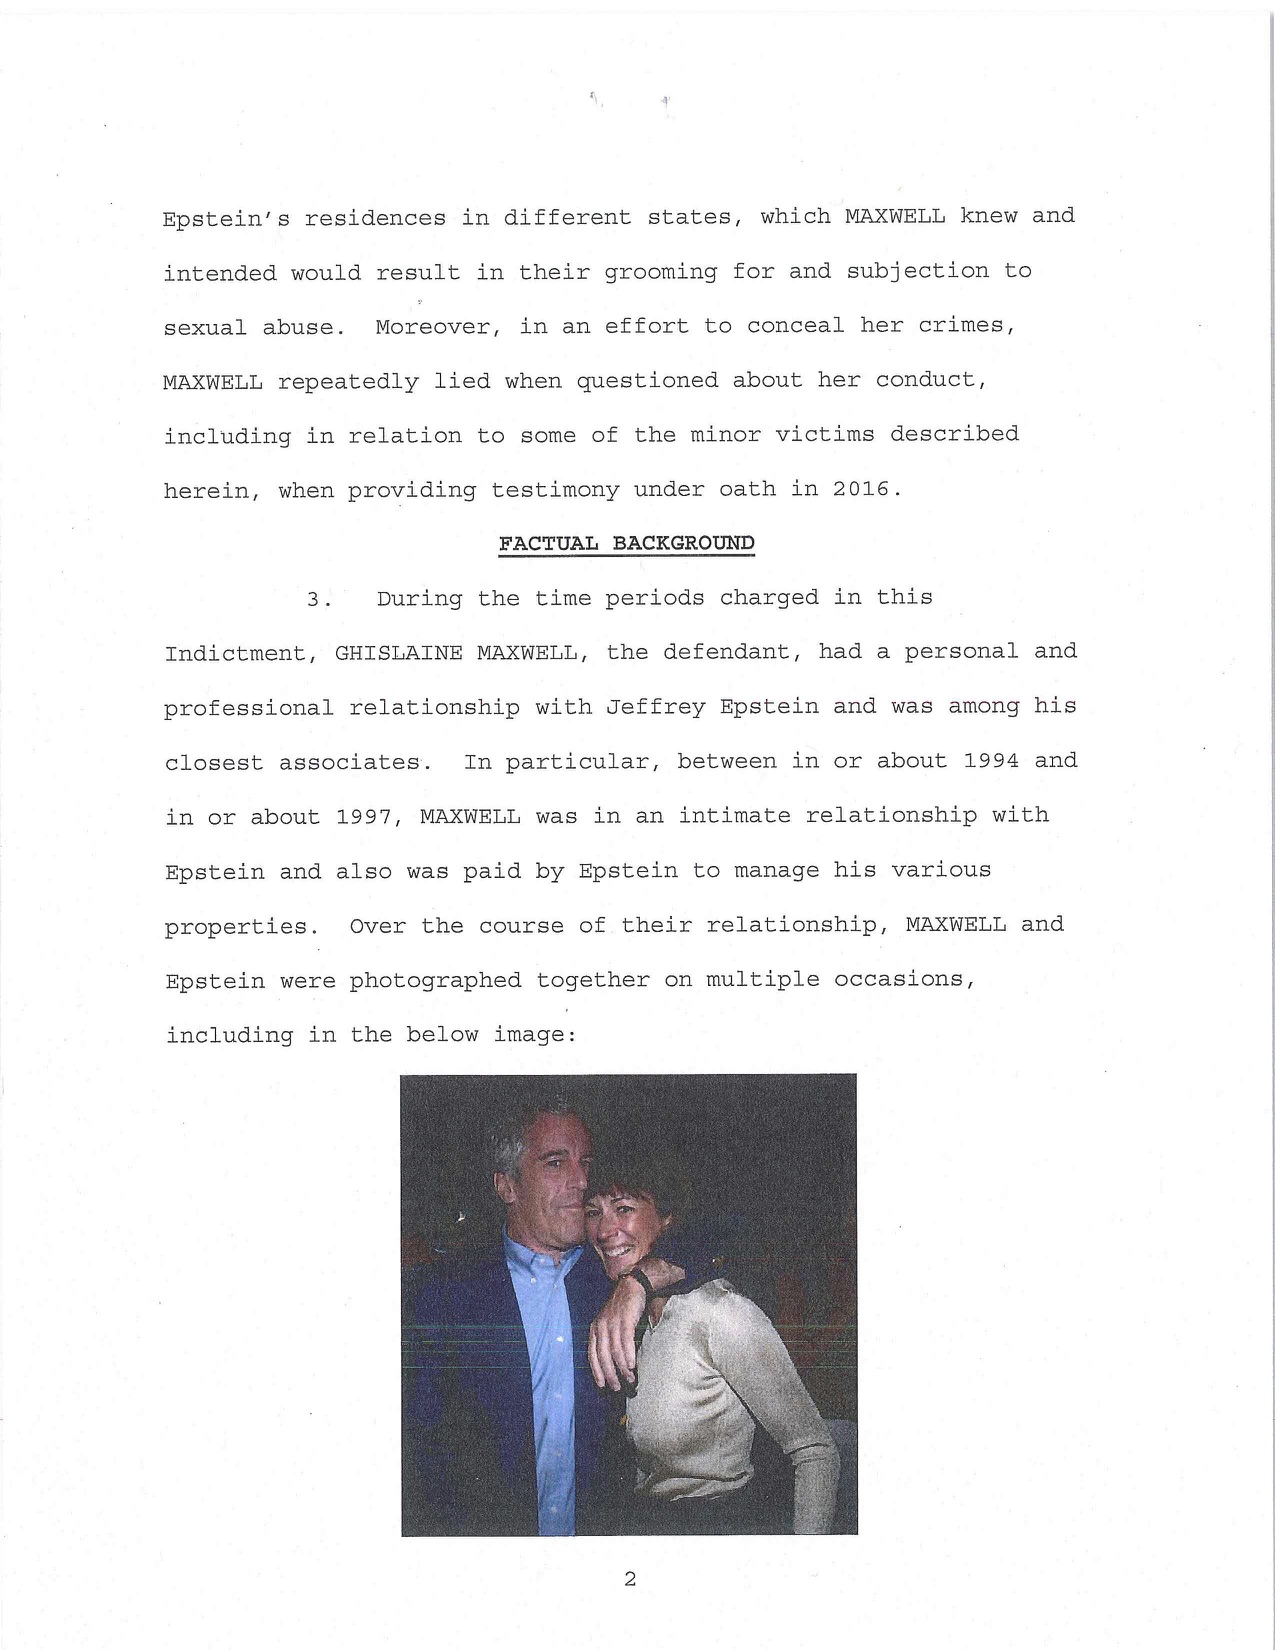 The United States vs Ghislaine Maxwell -  Epstein's residences in different states, which Maxwell knew and intended would result in their grooming for and subjection to sexual abuse. Moreover, in an effort to conceal her crimes, Maxwell repeatedly lied wh